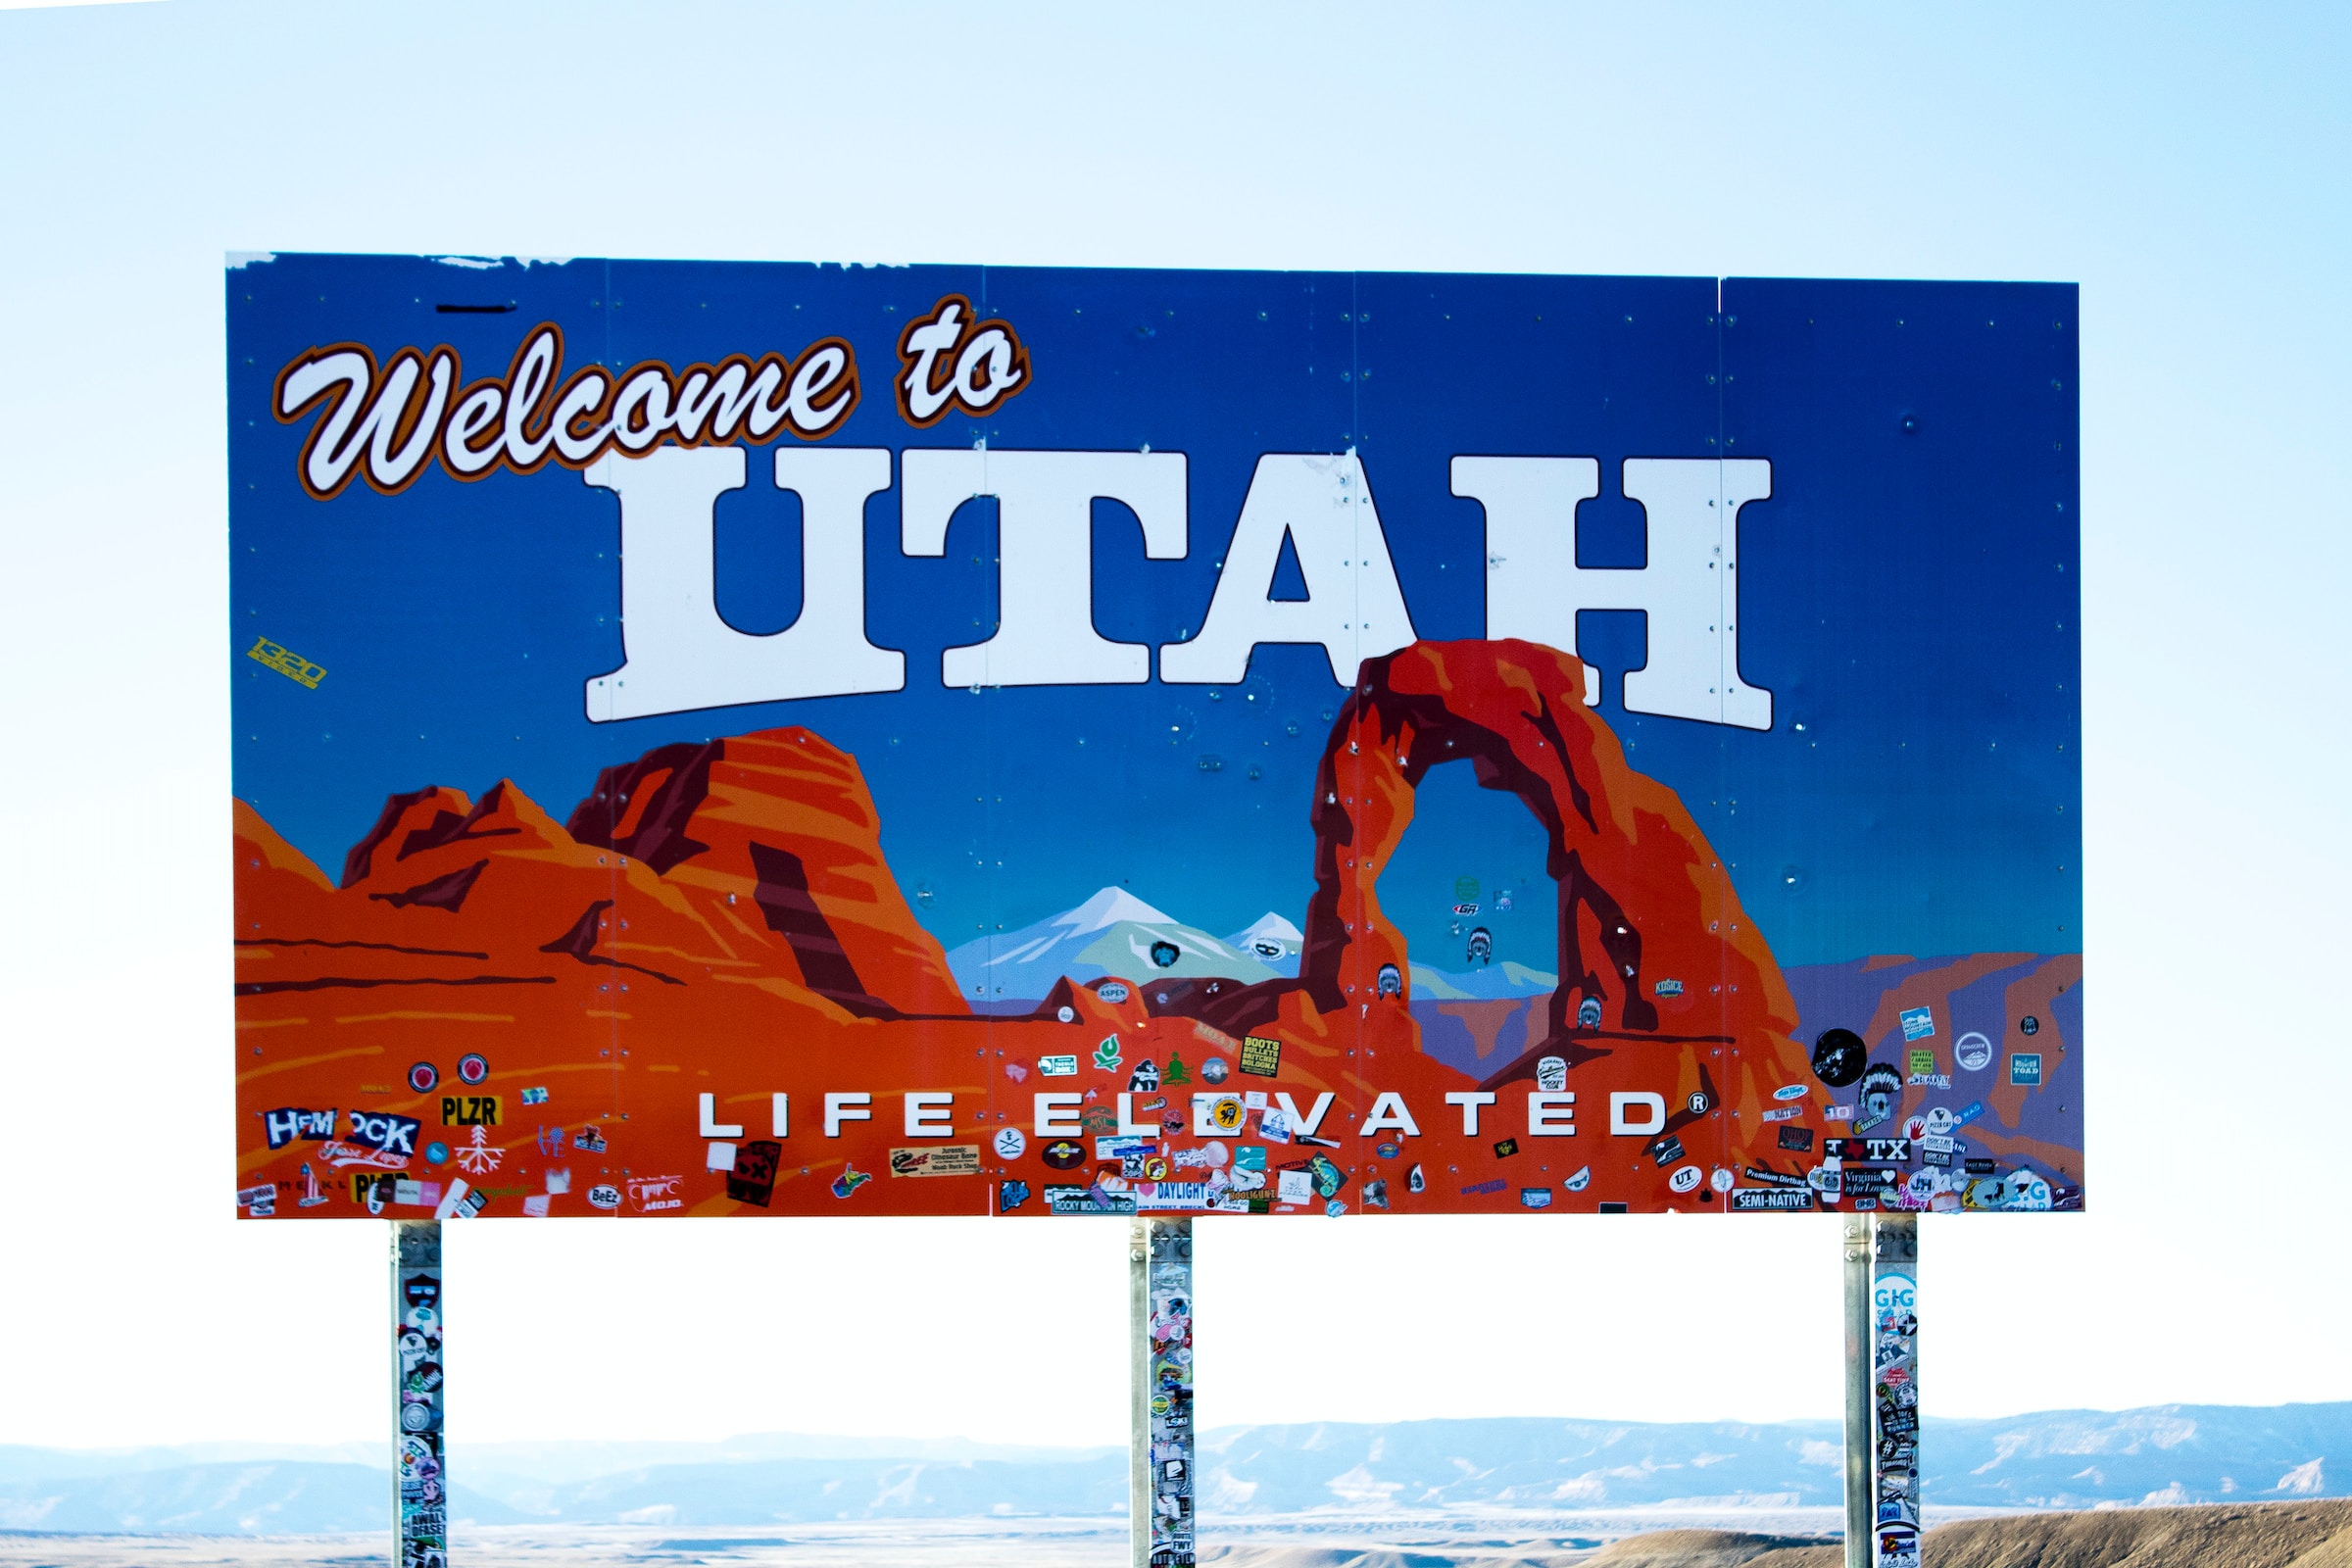 Welcome to Utah billboard with red rocks on the side of a highway